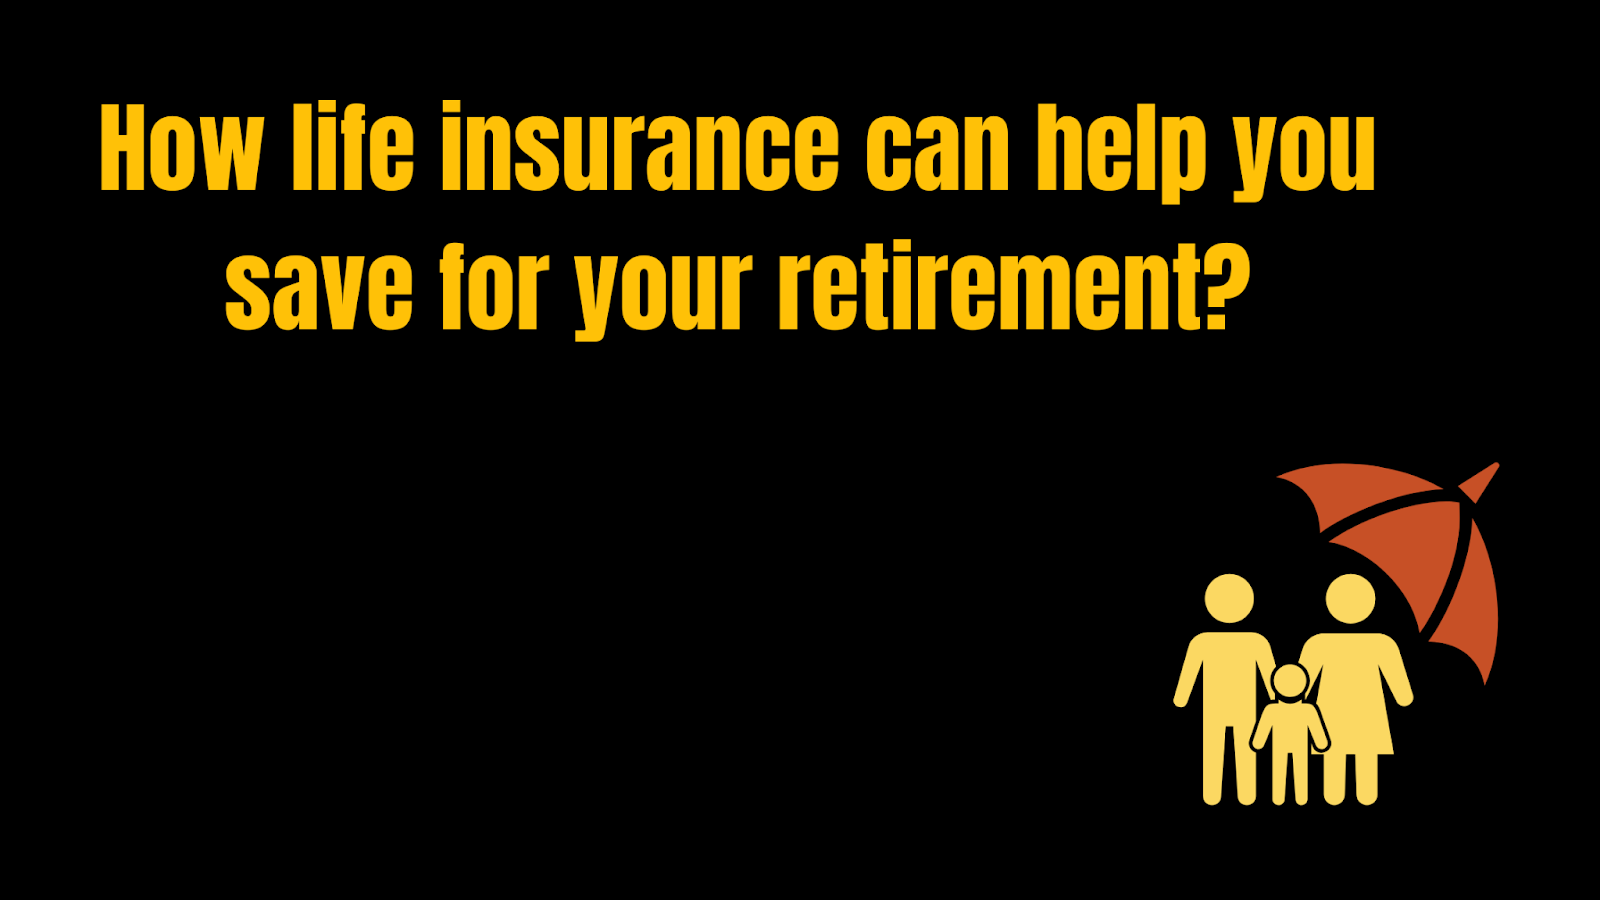 How life insurance can help you save for your retirement?